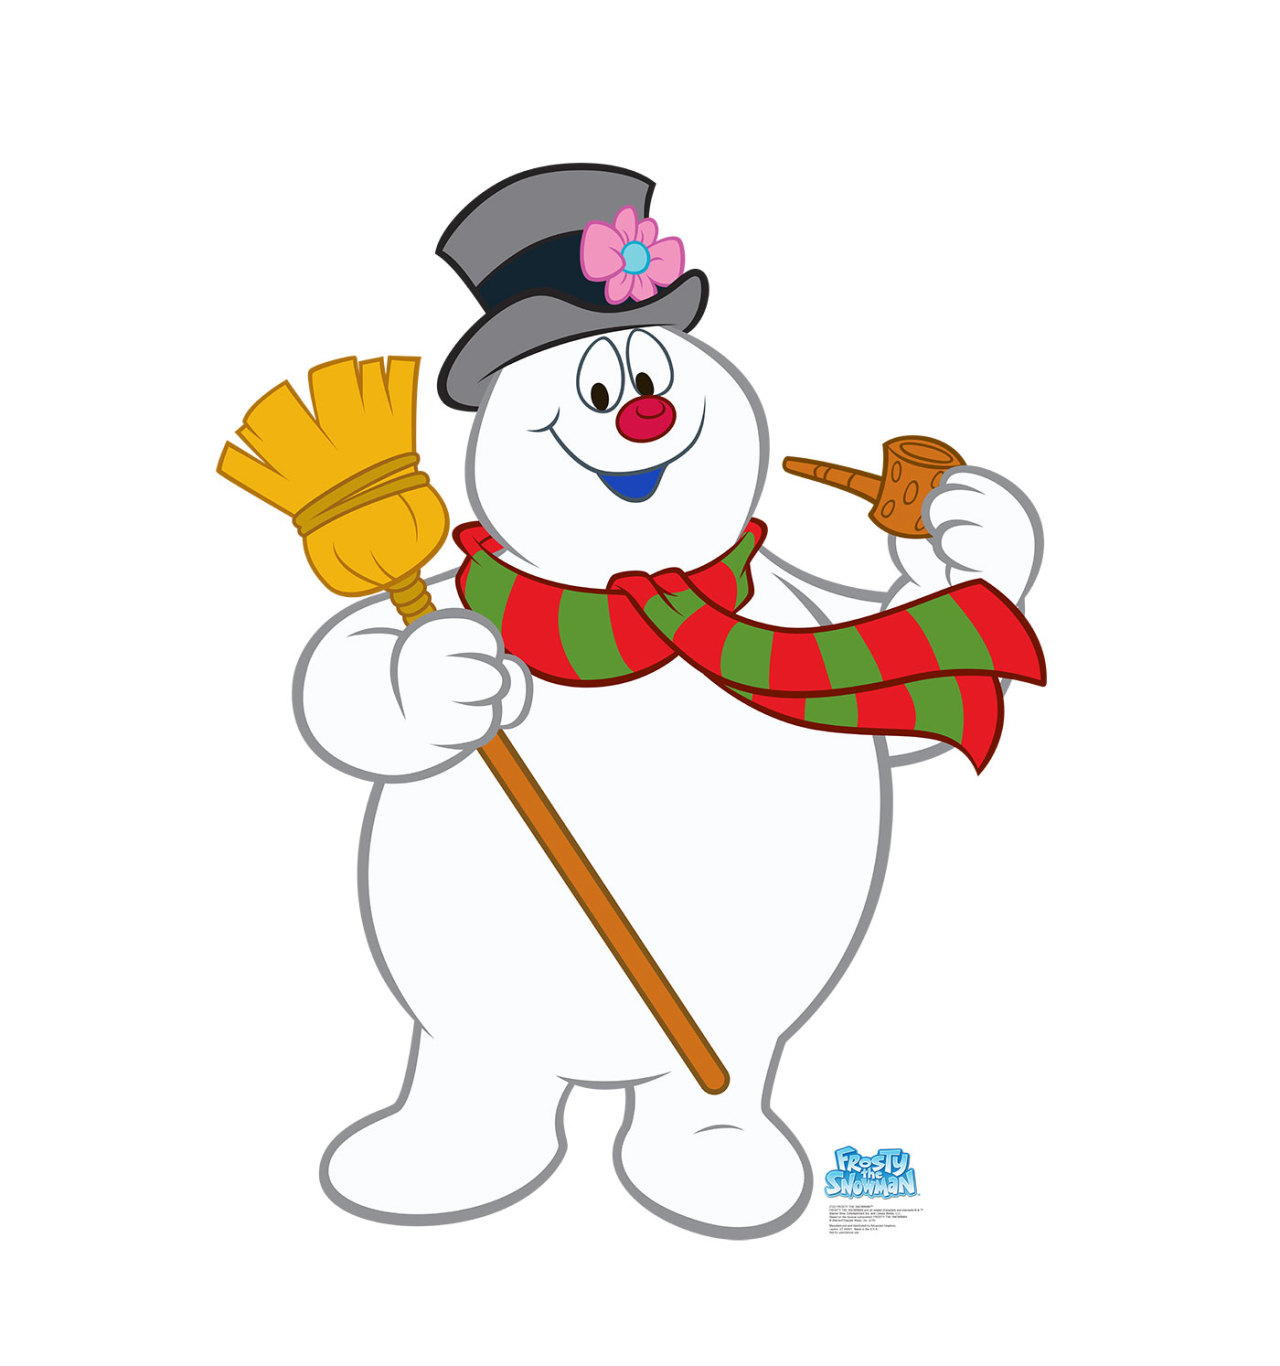 twd-musicbox-mystery-frosty-the-snowman-template-and-the-greenhouse